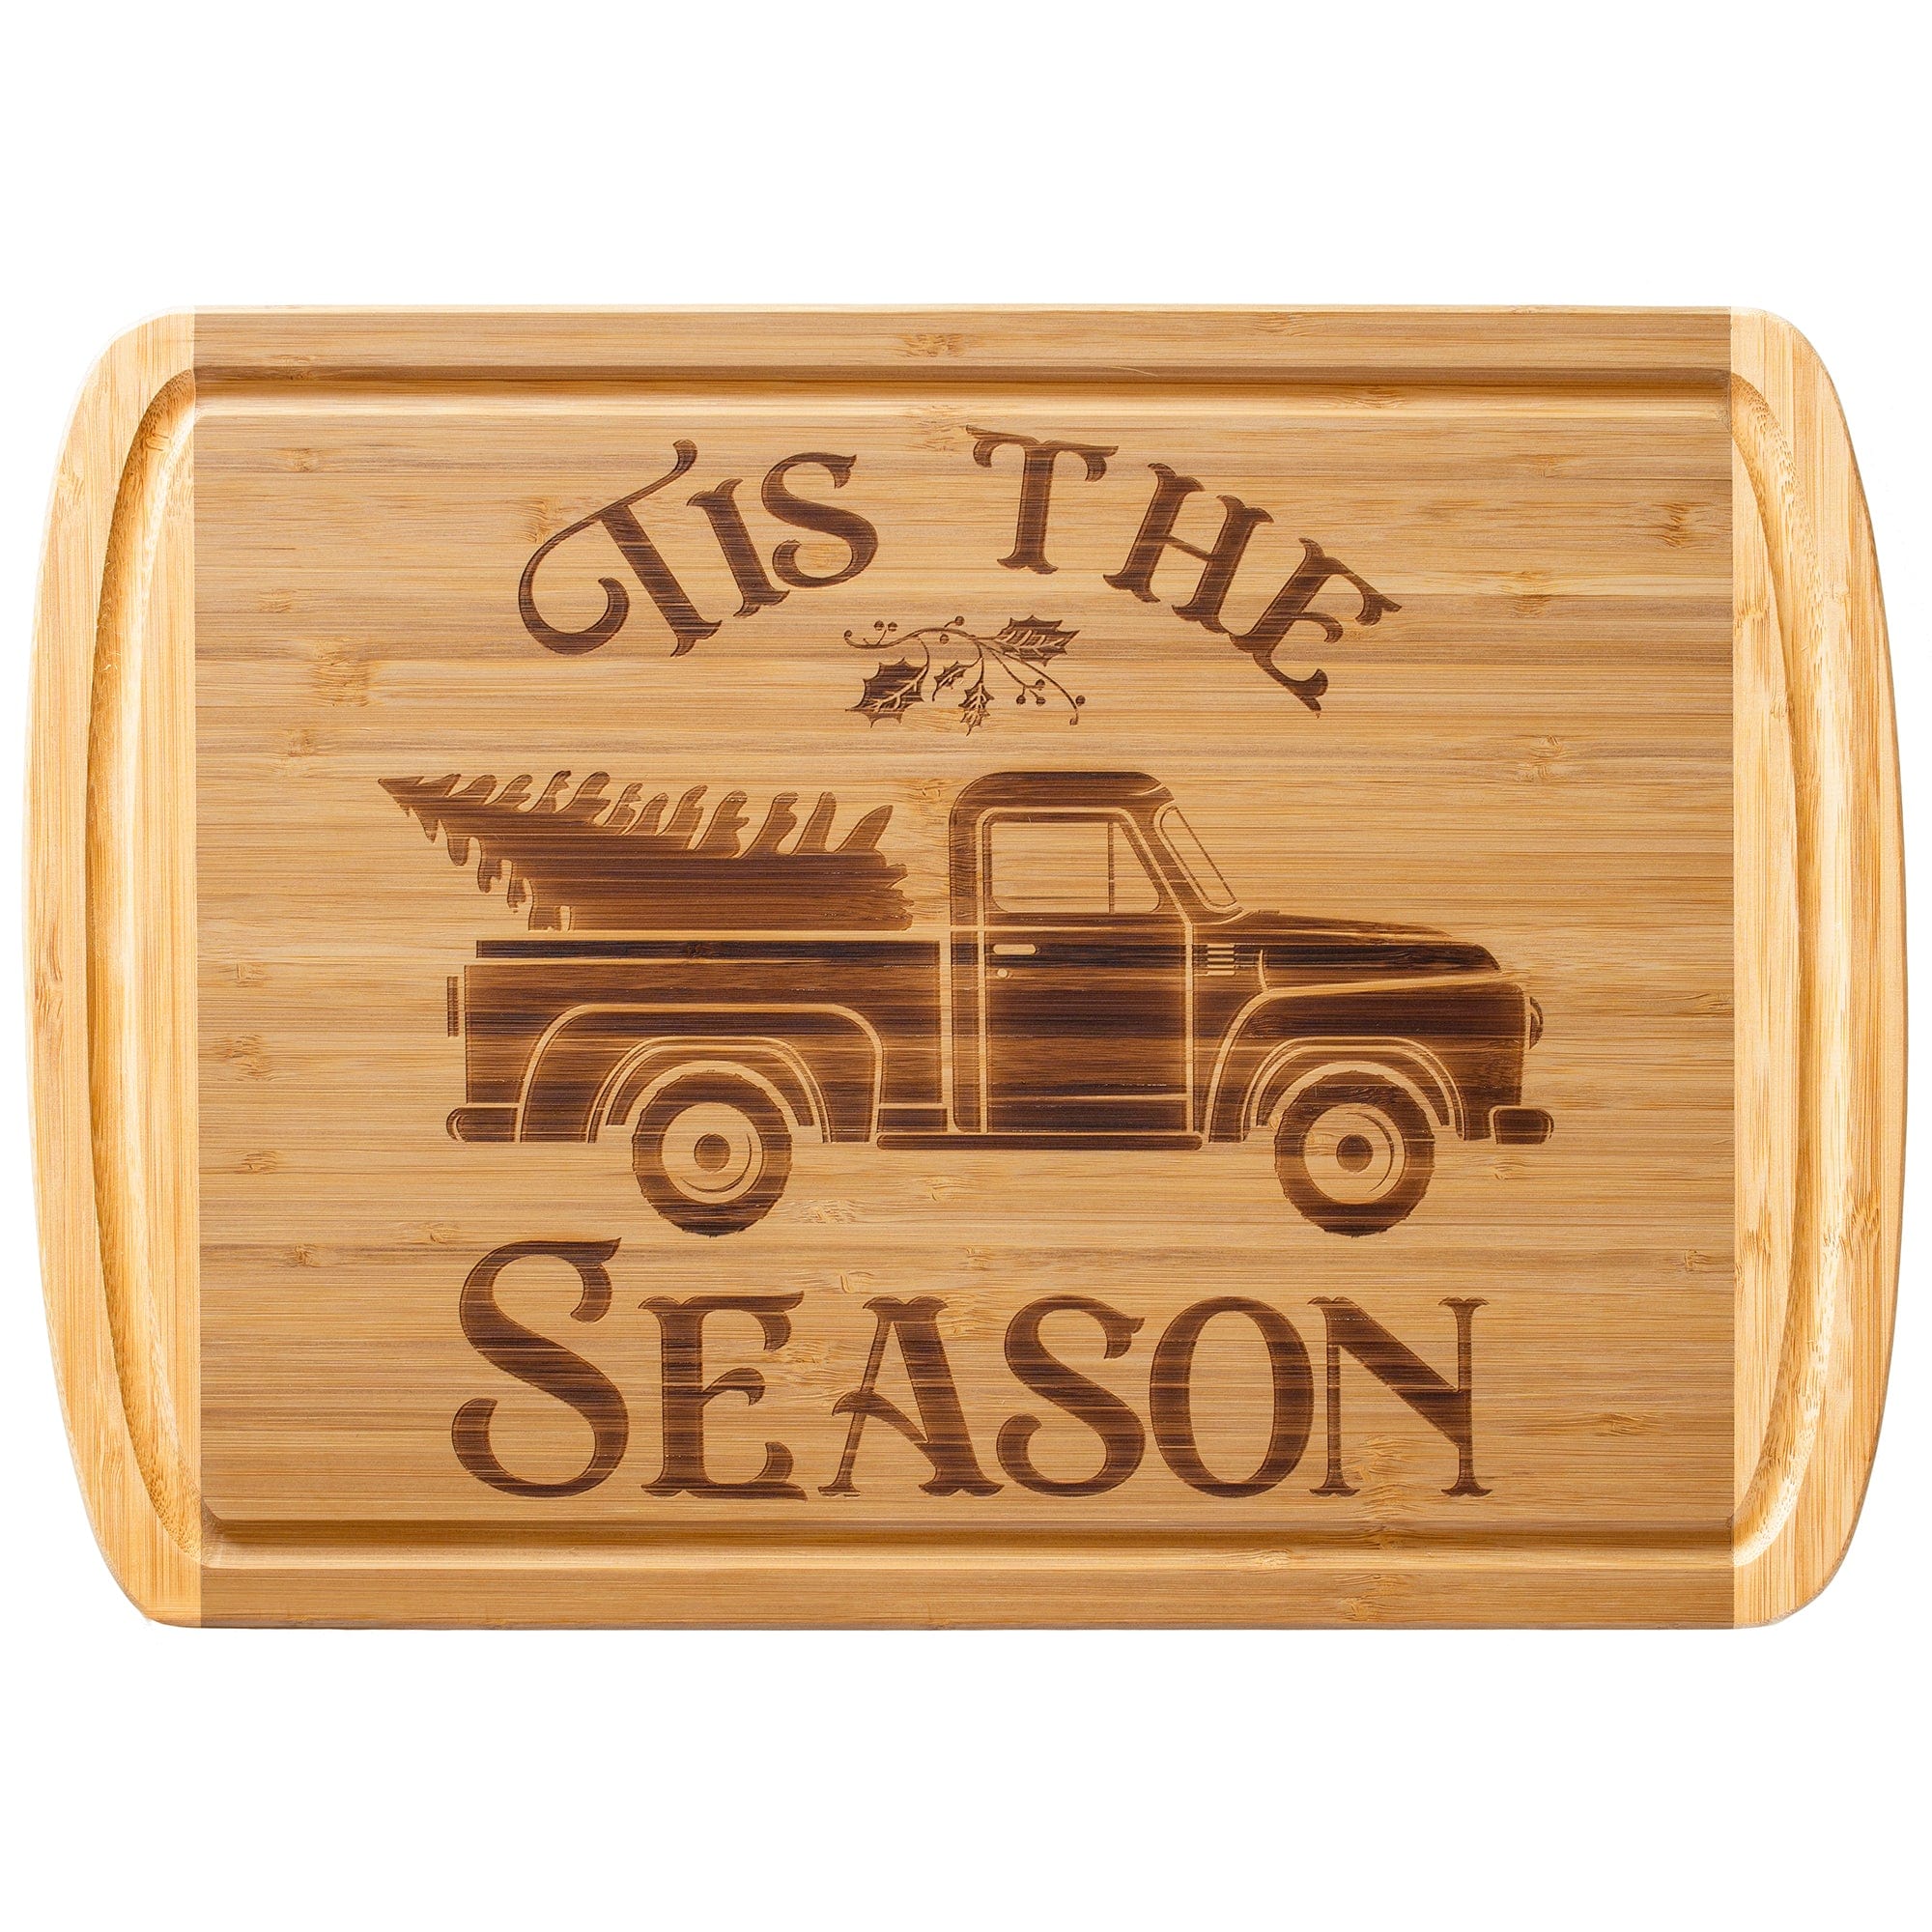 Totally Bamboo "Tis the Season" Christmas Kona Groove Carving Board with Engraved Holiday Artwork, 18" x 12-1/2"